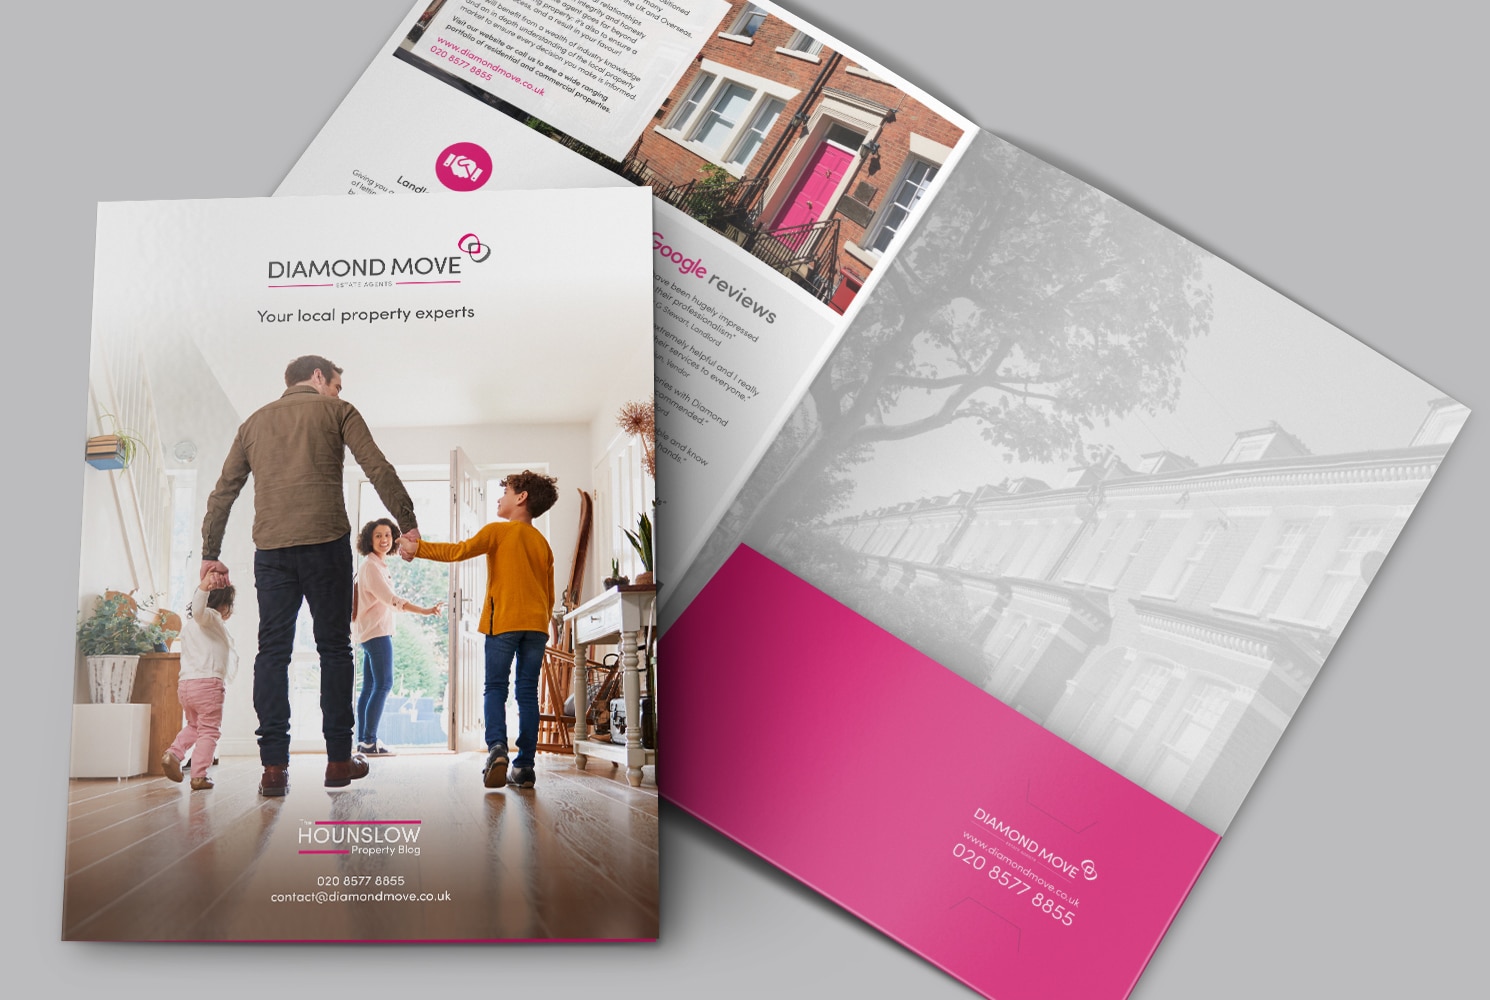 Mock up of a folder for Diamond Move Estate Agents showing the cover and inner pages